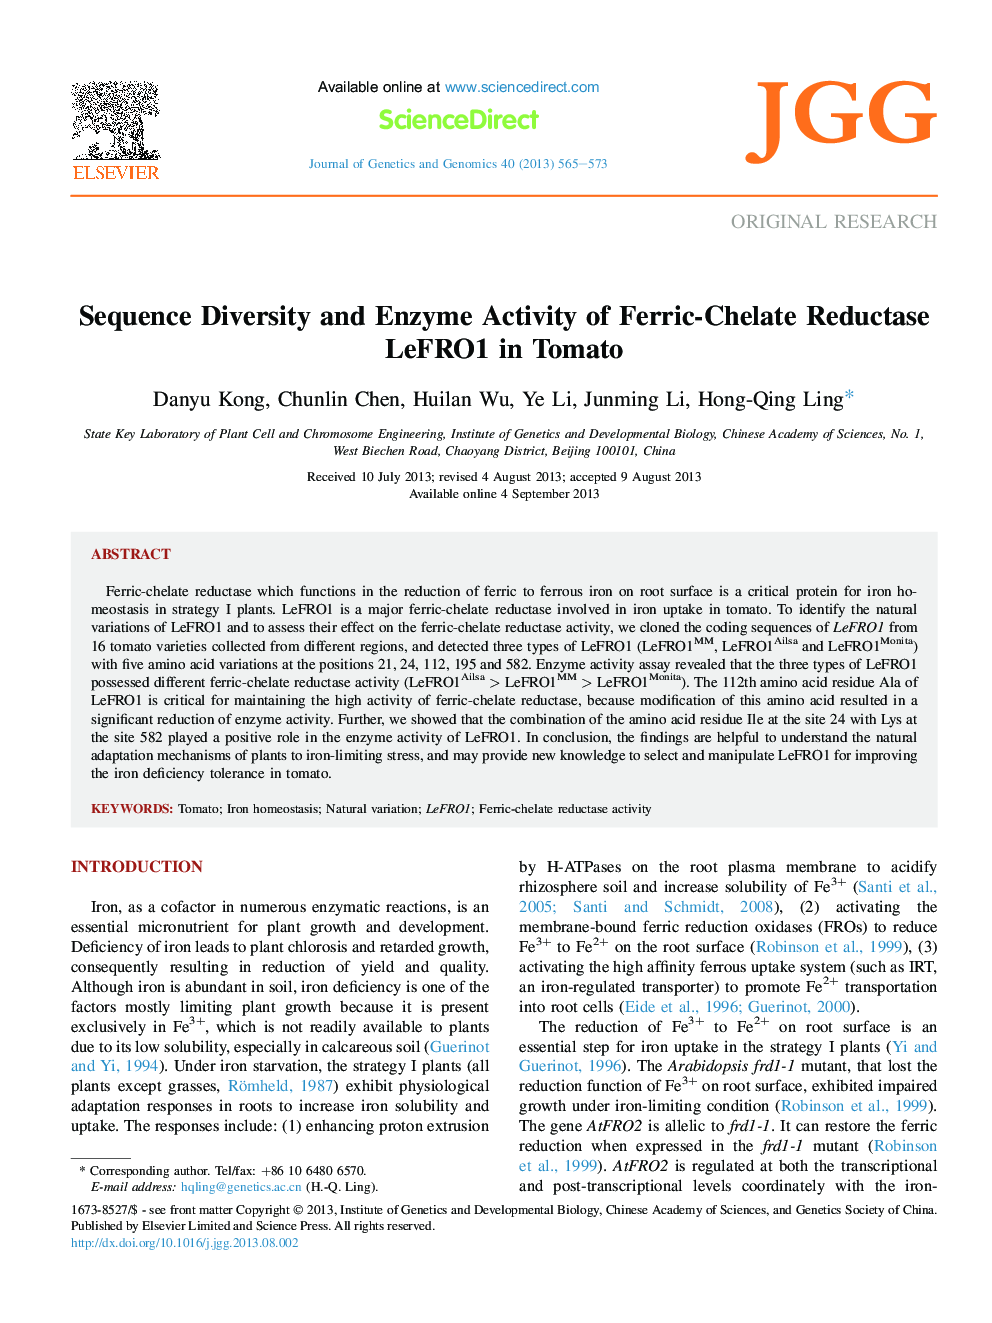 Sequence Diversity and Enzyme Activity of Ferric-Chelate Reductase LeFRO1 in Tomato